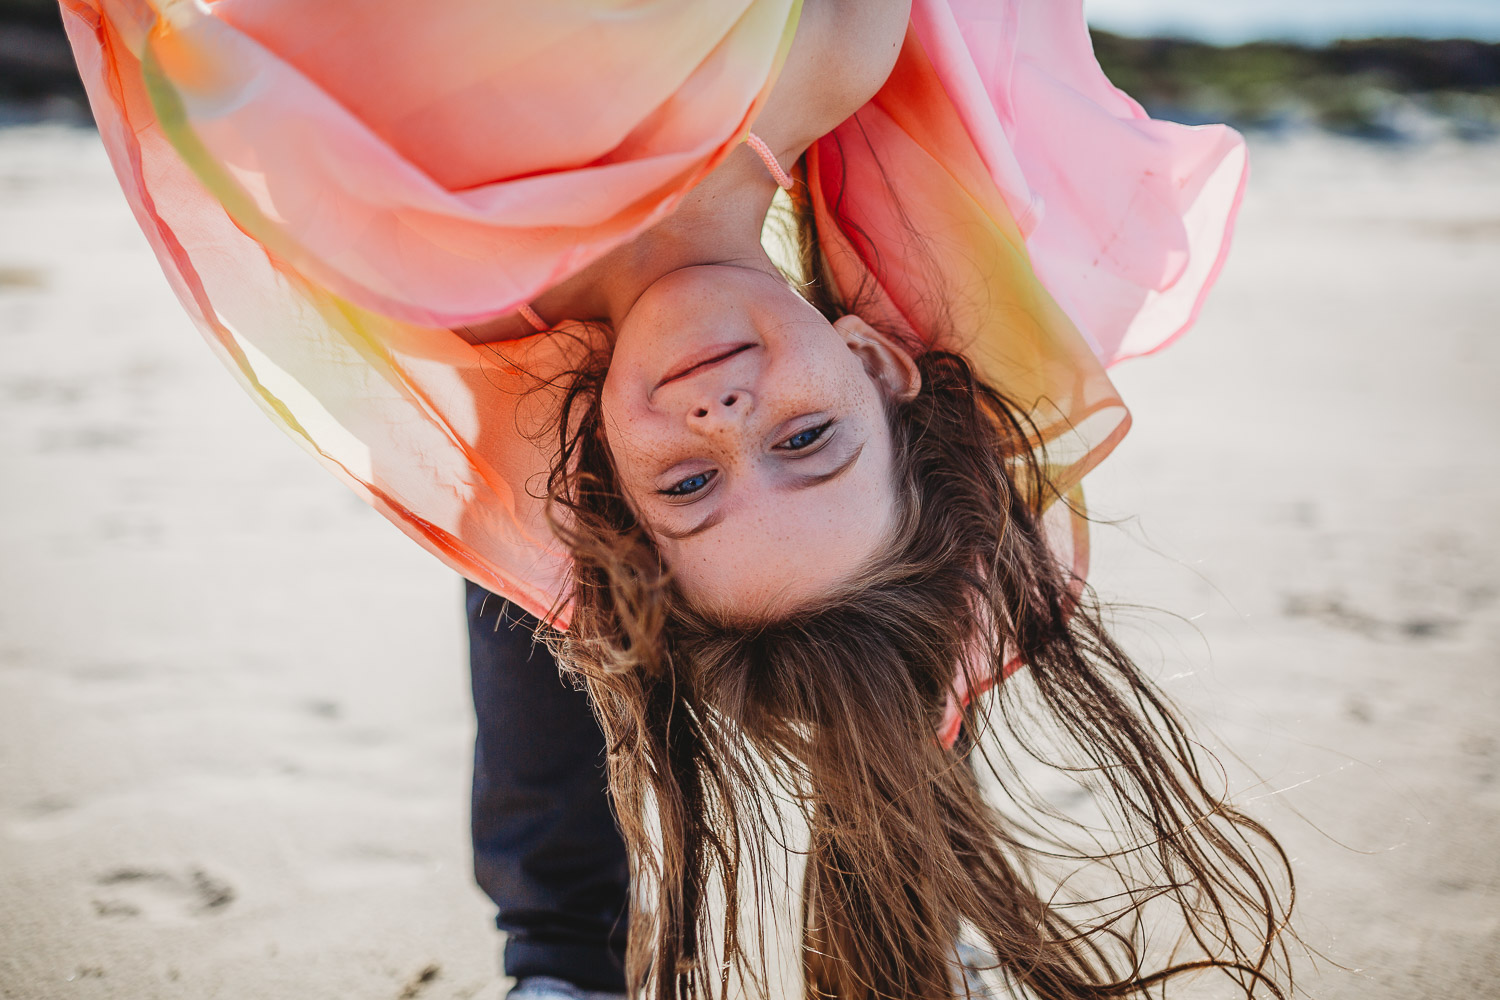 Young girl hanging upside down smiling